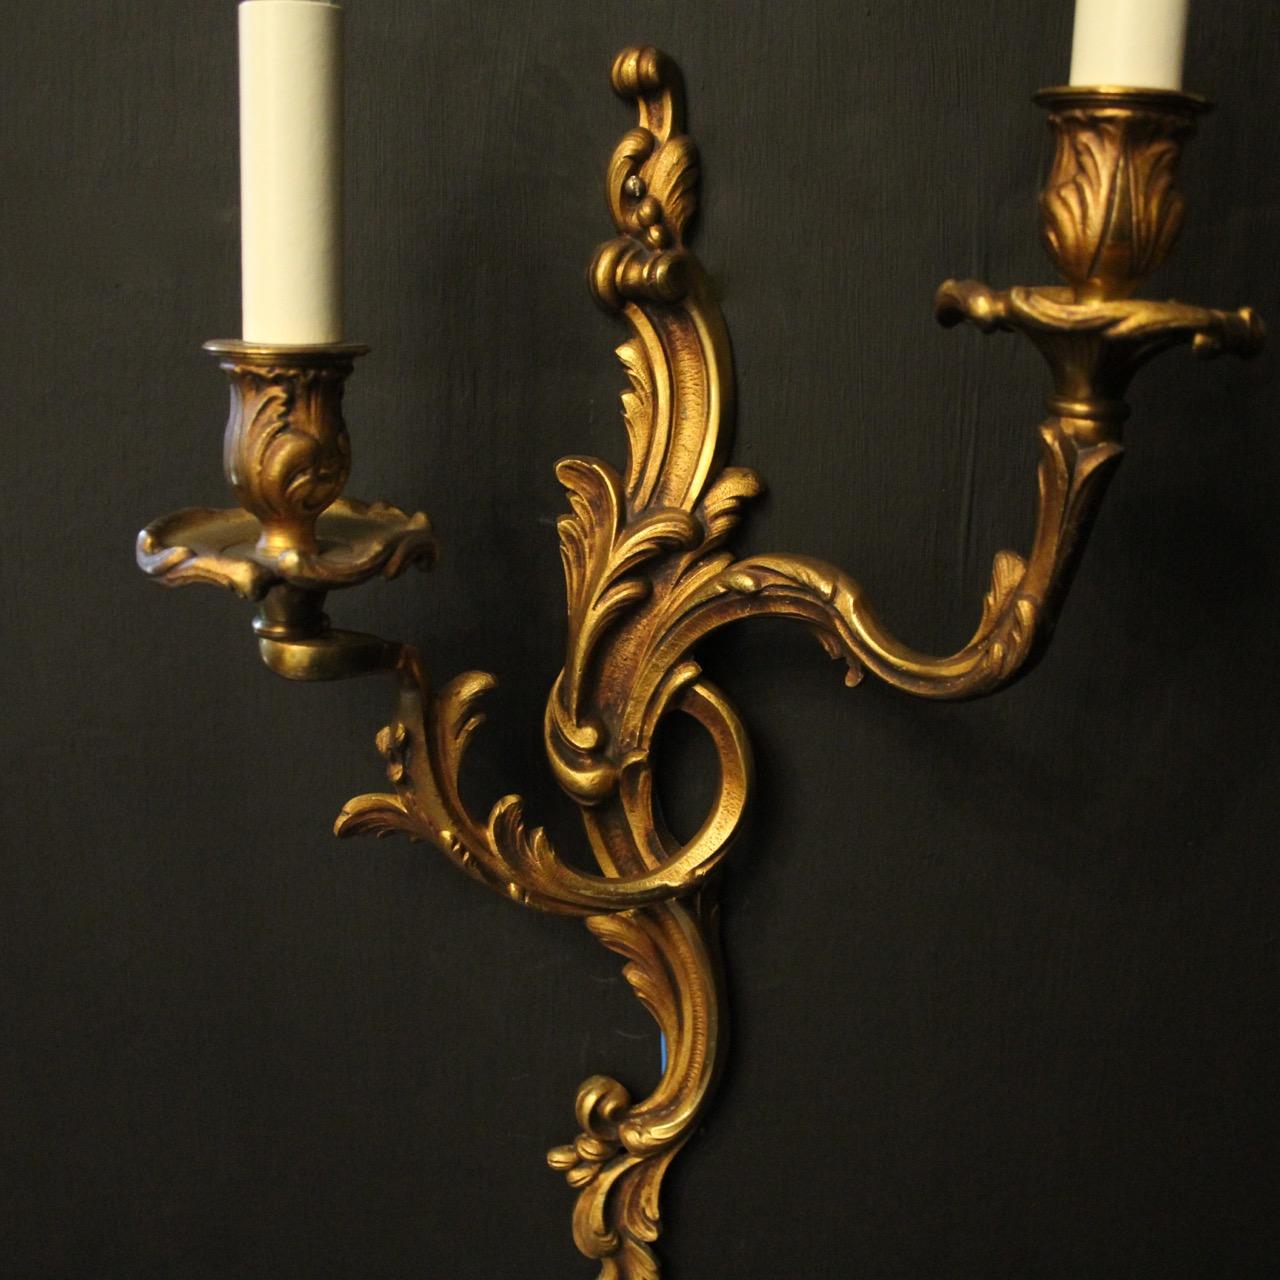 A French pair of gilded bronze twin arm opposing antique wall lights, the leaf scrolling arms with leaf bobeche drip pans and bulbous candle sconces, issuing from an opposing leaf elongated backplate, nice original gilded patination and great large